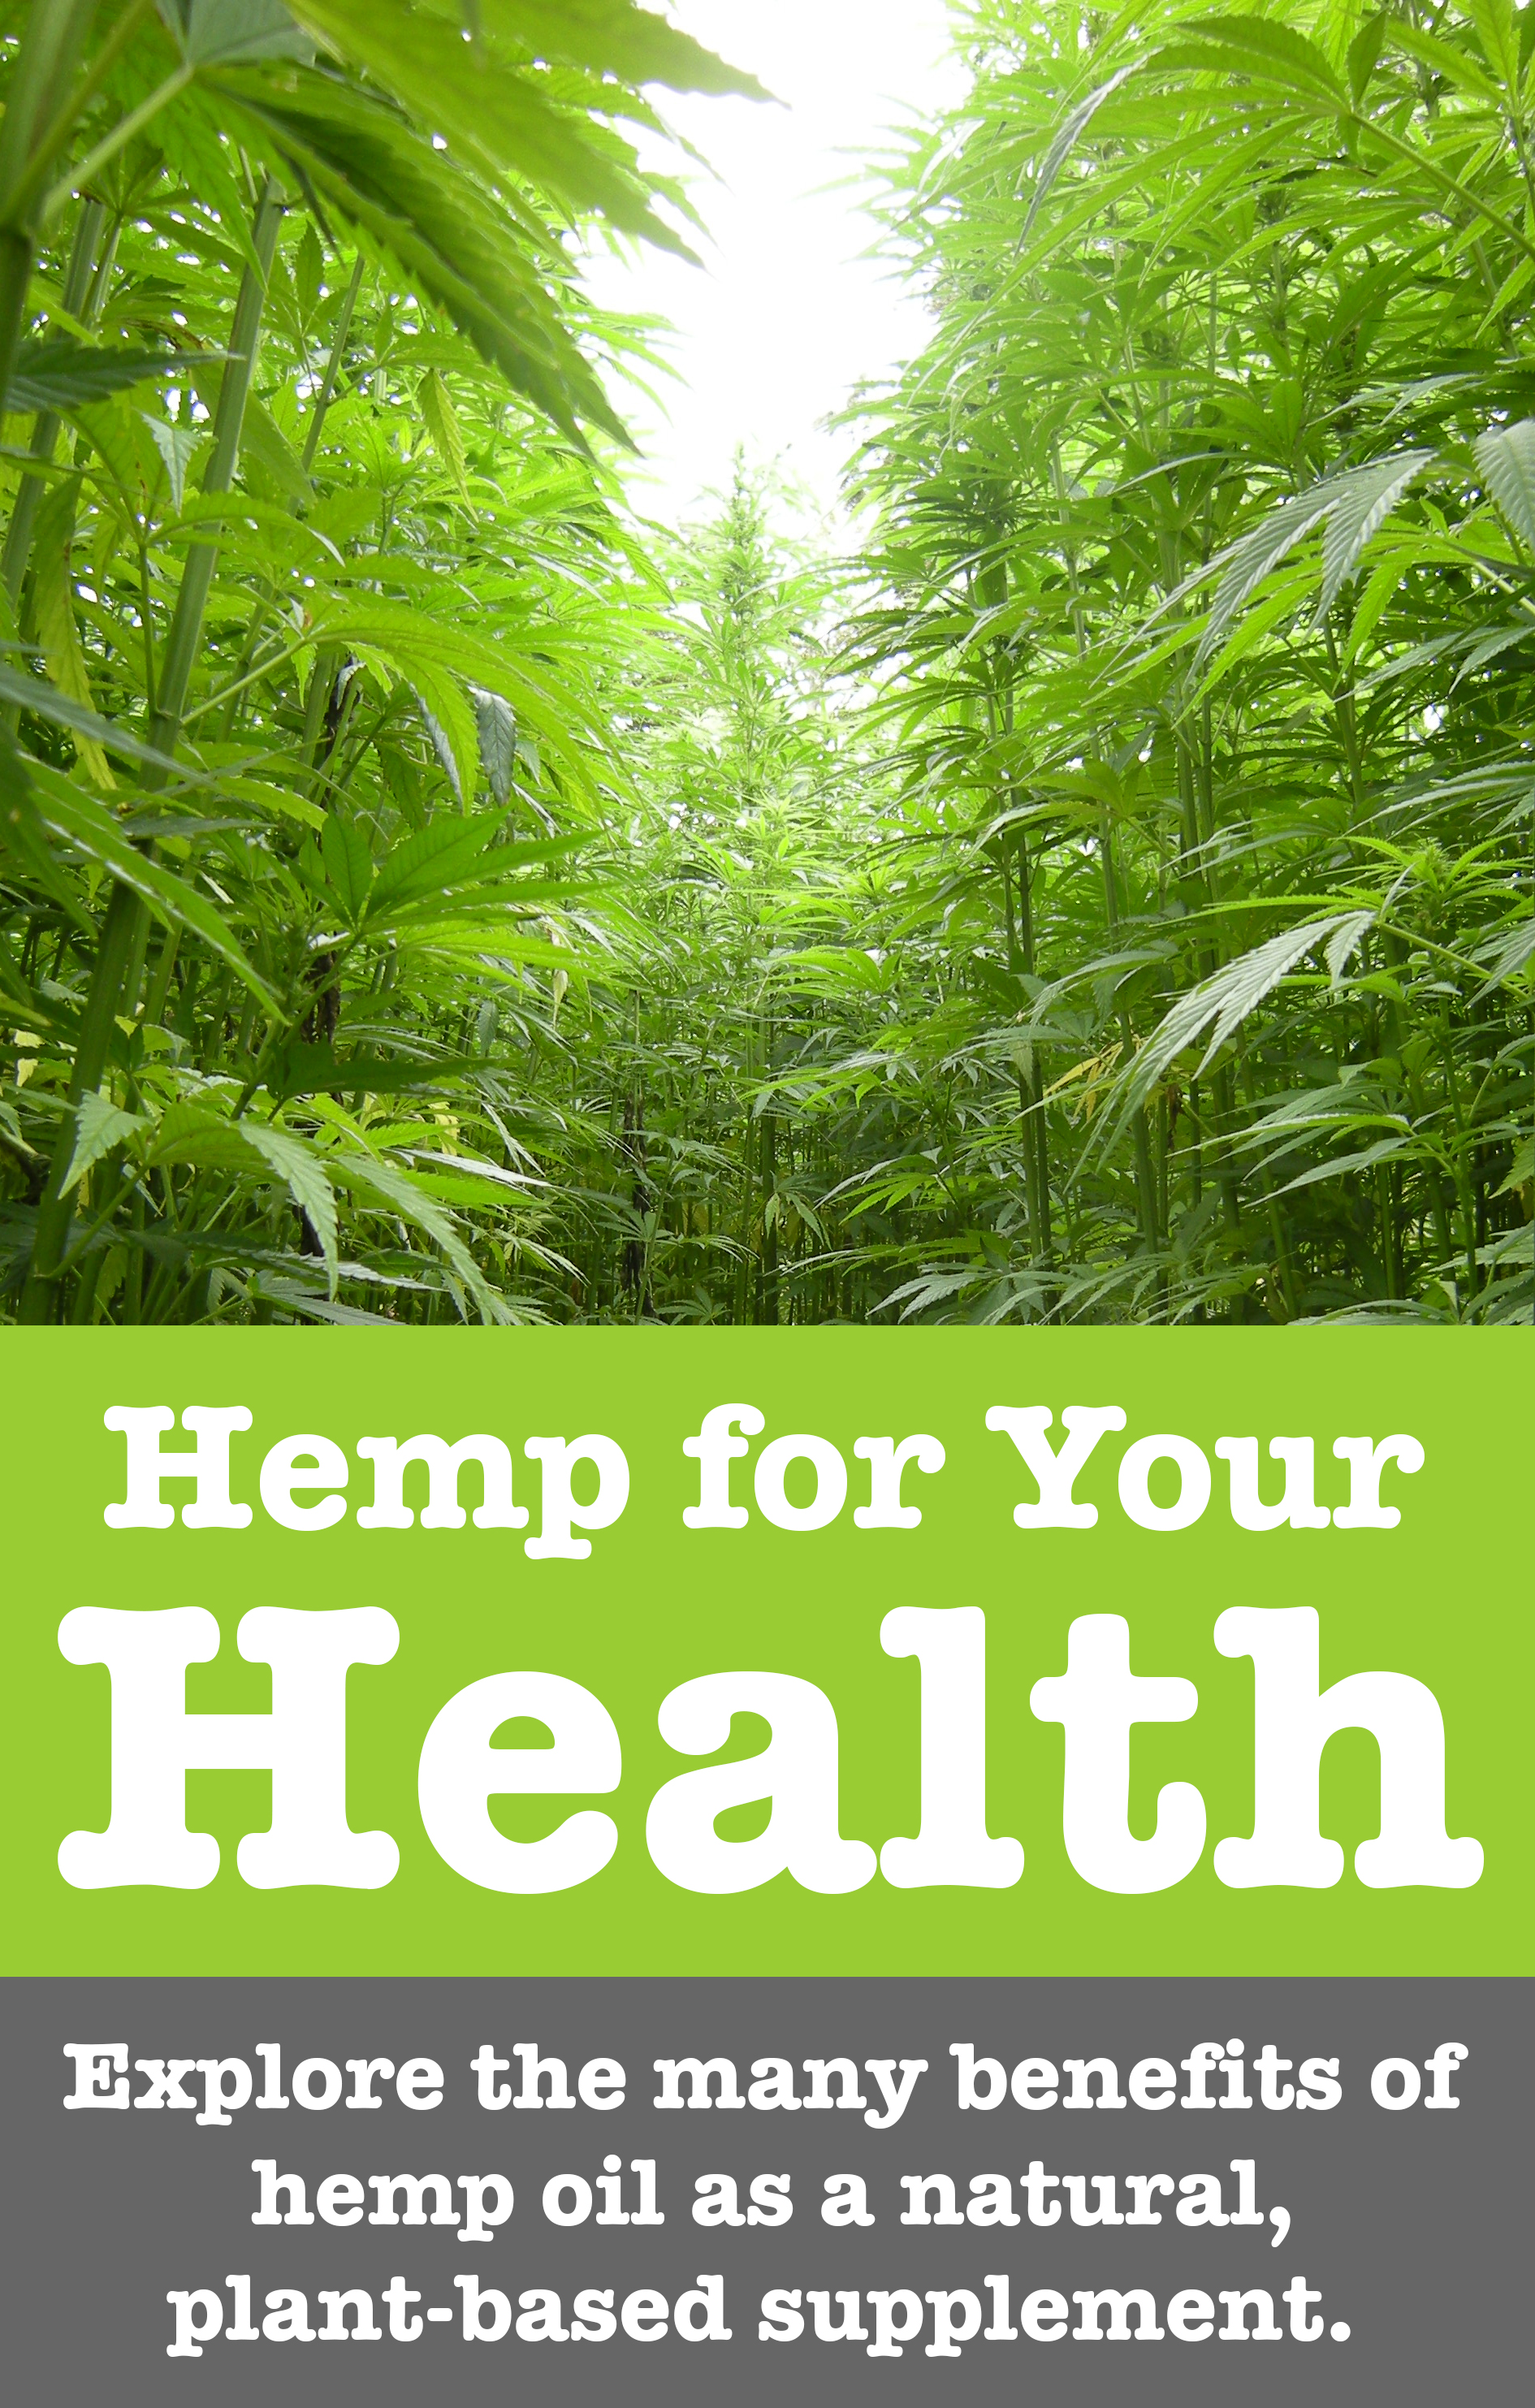 Explore the many benefits of hemp oil for your health.